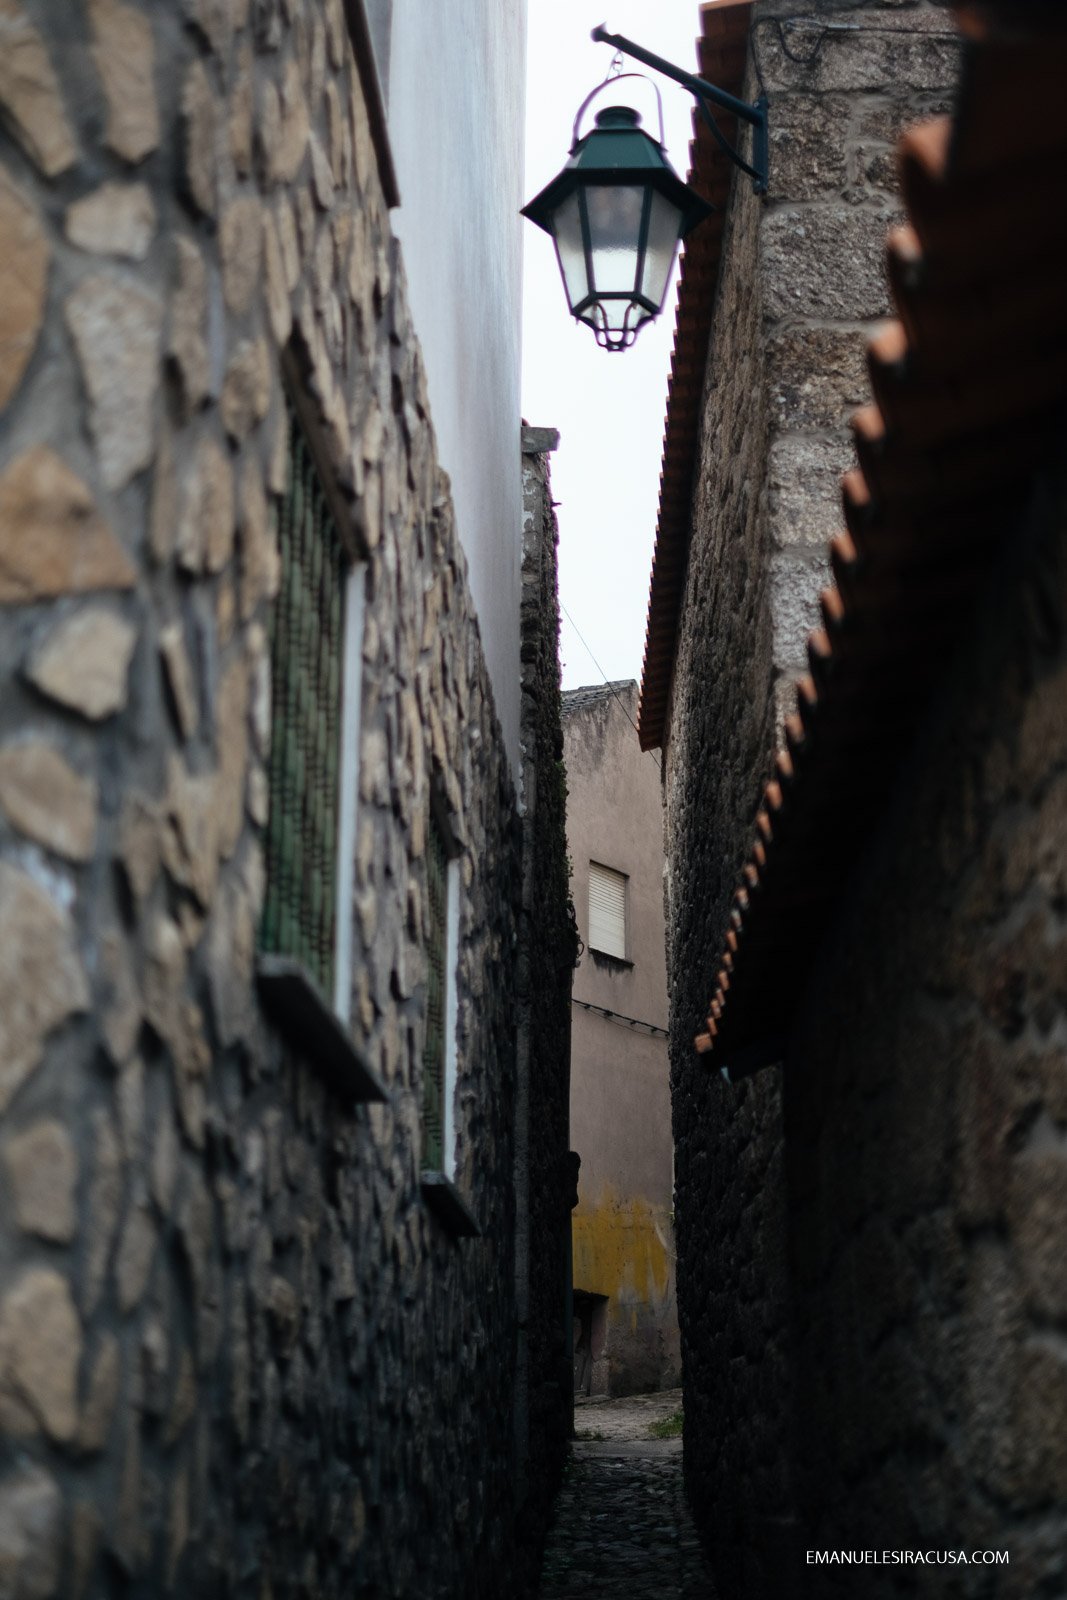 A narrow lane in Belmonte, 2016 - photo by Emanuele Siracusa for Nelson Carvalheiro Travel & Food and Centro de Portugal